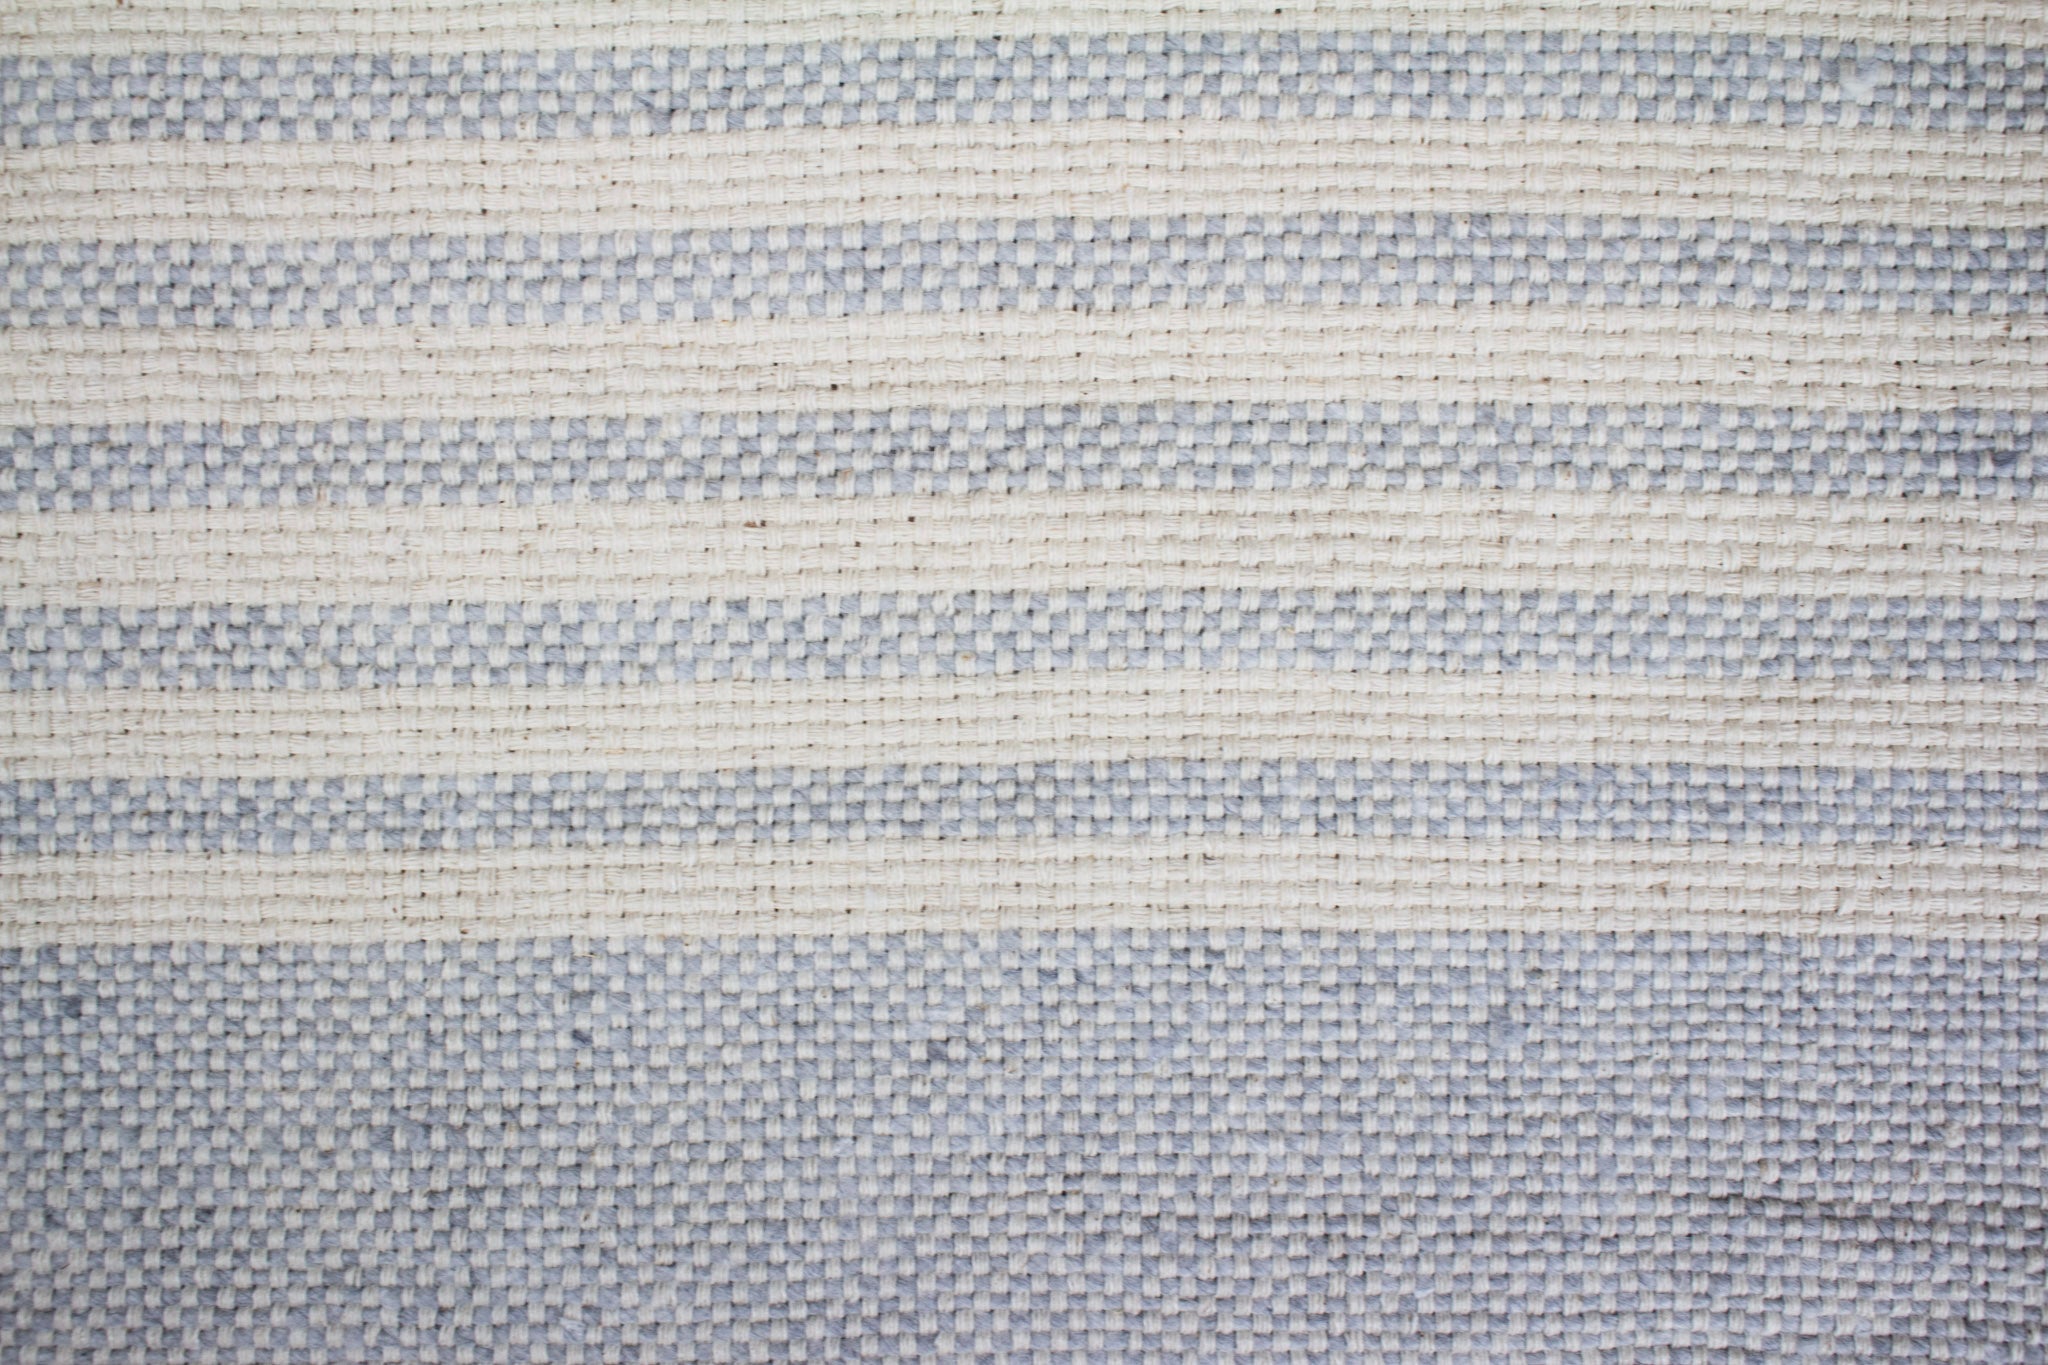 Small Blue Handmade Moroccan Throw with White Stripes Textile Une Vie Nomade Brand_Une Vie Nomade New Arrivals Une Vie Nomade 80c465fba0e9aec6b68654b2fadb8cd4_5201a9ab-a05a-489f-bc5b-f140532b3e46